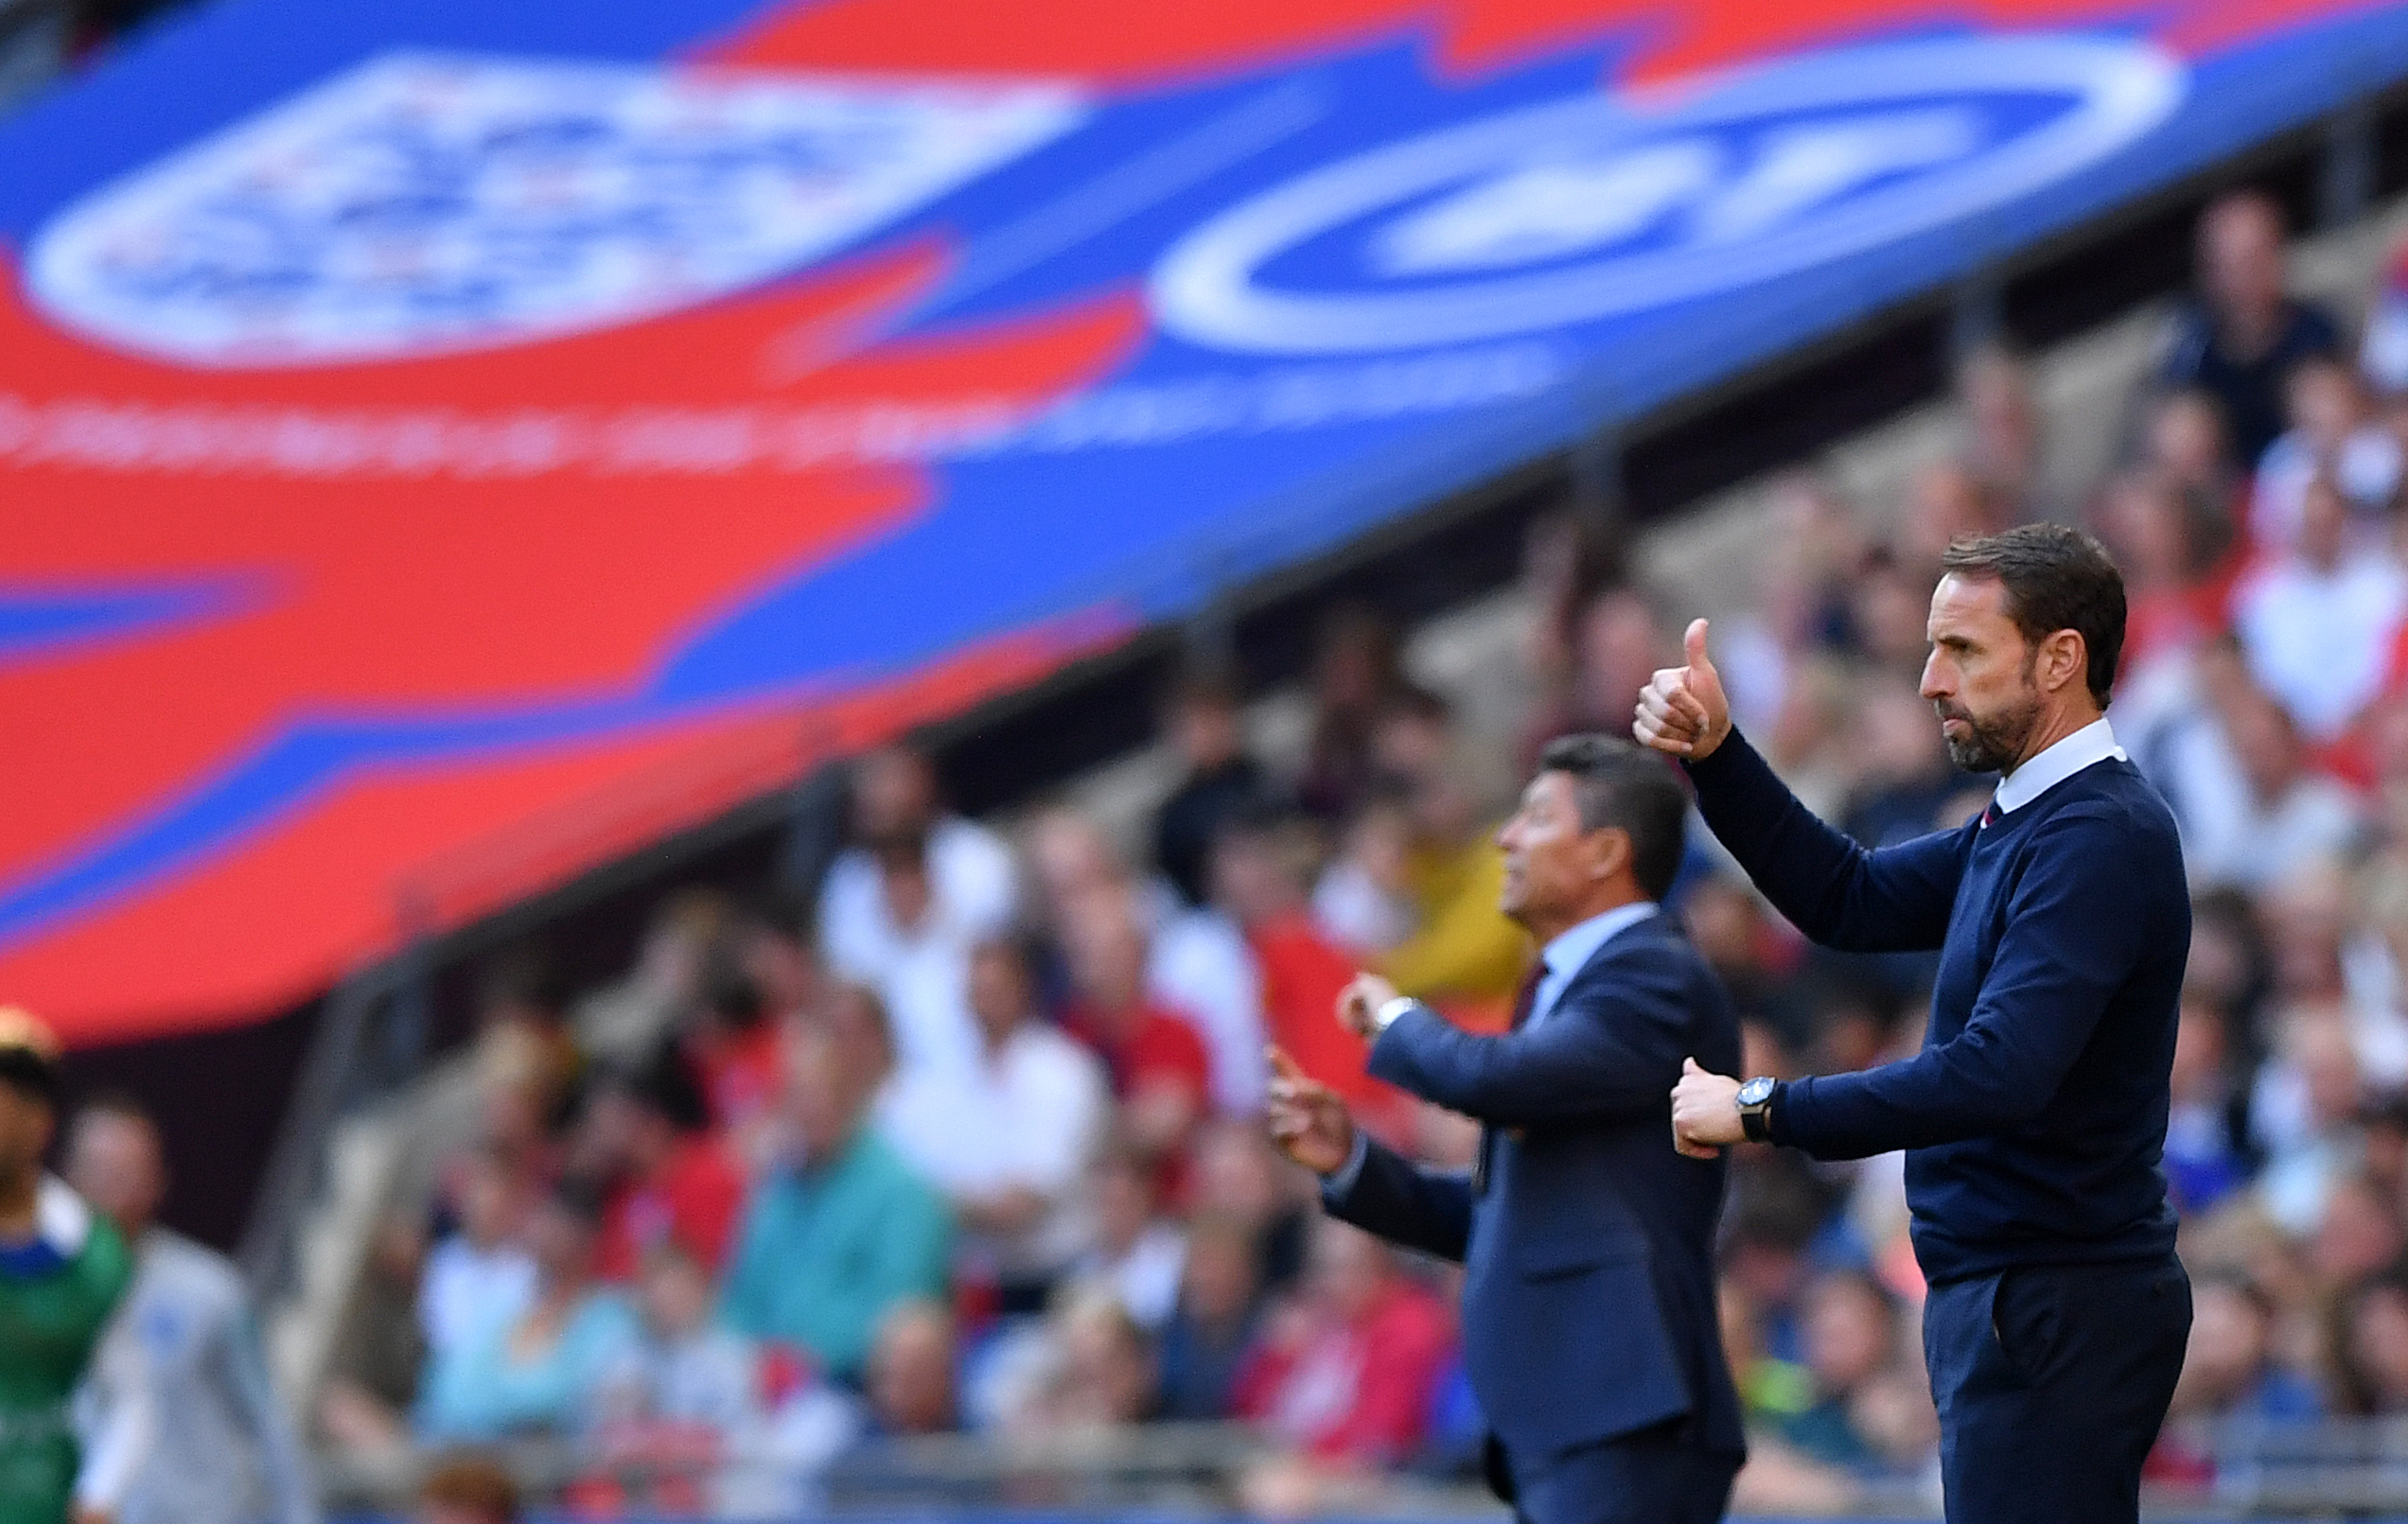 England's manager Gareth Southgate shouts instructions to his players from the touchline during the UEFA Euro 2020 qualifying first round Group A football match between England and Bulgaria at Wembley Stadium in London on September 7, 2019. (Photo by Ben STANSALL / AFP) / NOT FOR MARKETING OR ADVERTISING USE / RESTRICTED TO EDITORIAL USE        (Photo credit should read BEN STANSALL/AFP/Getty Images)